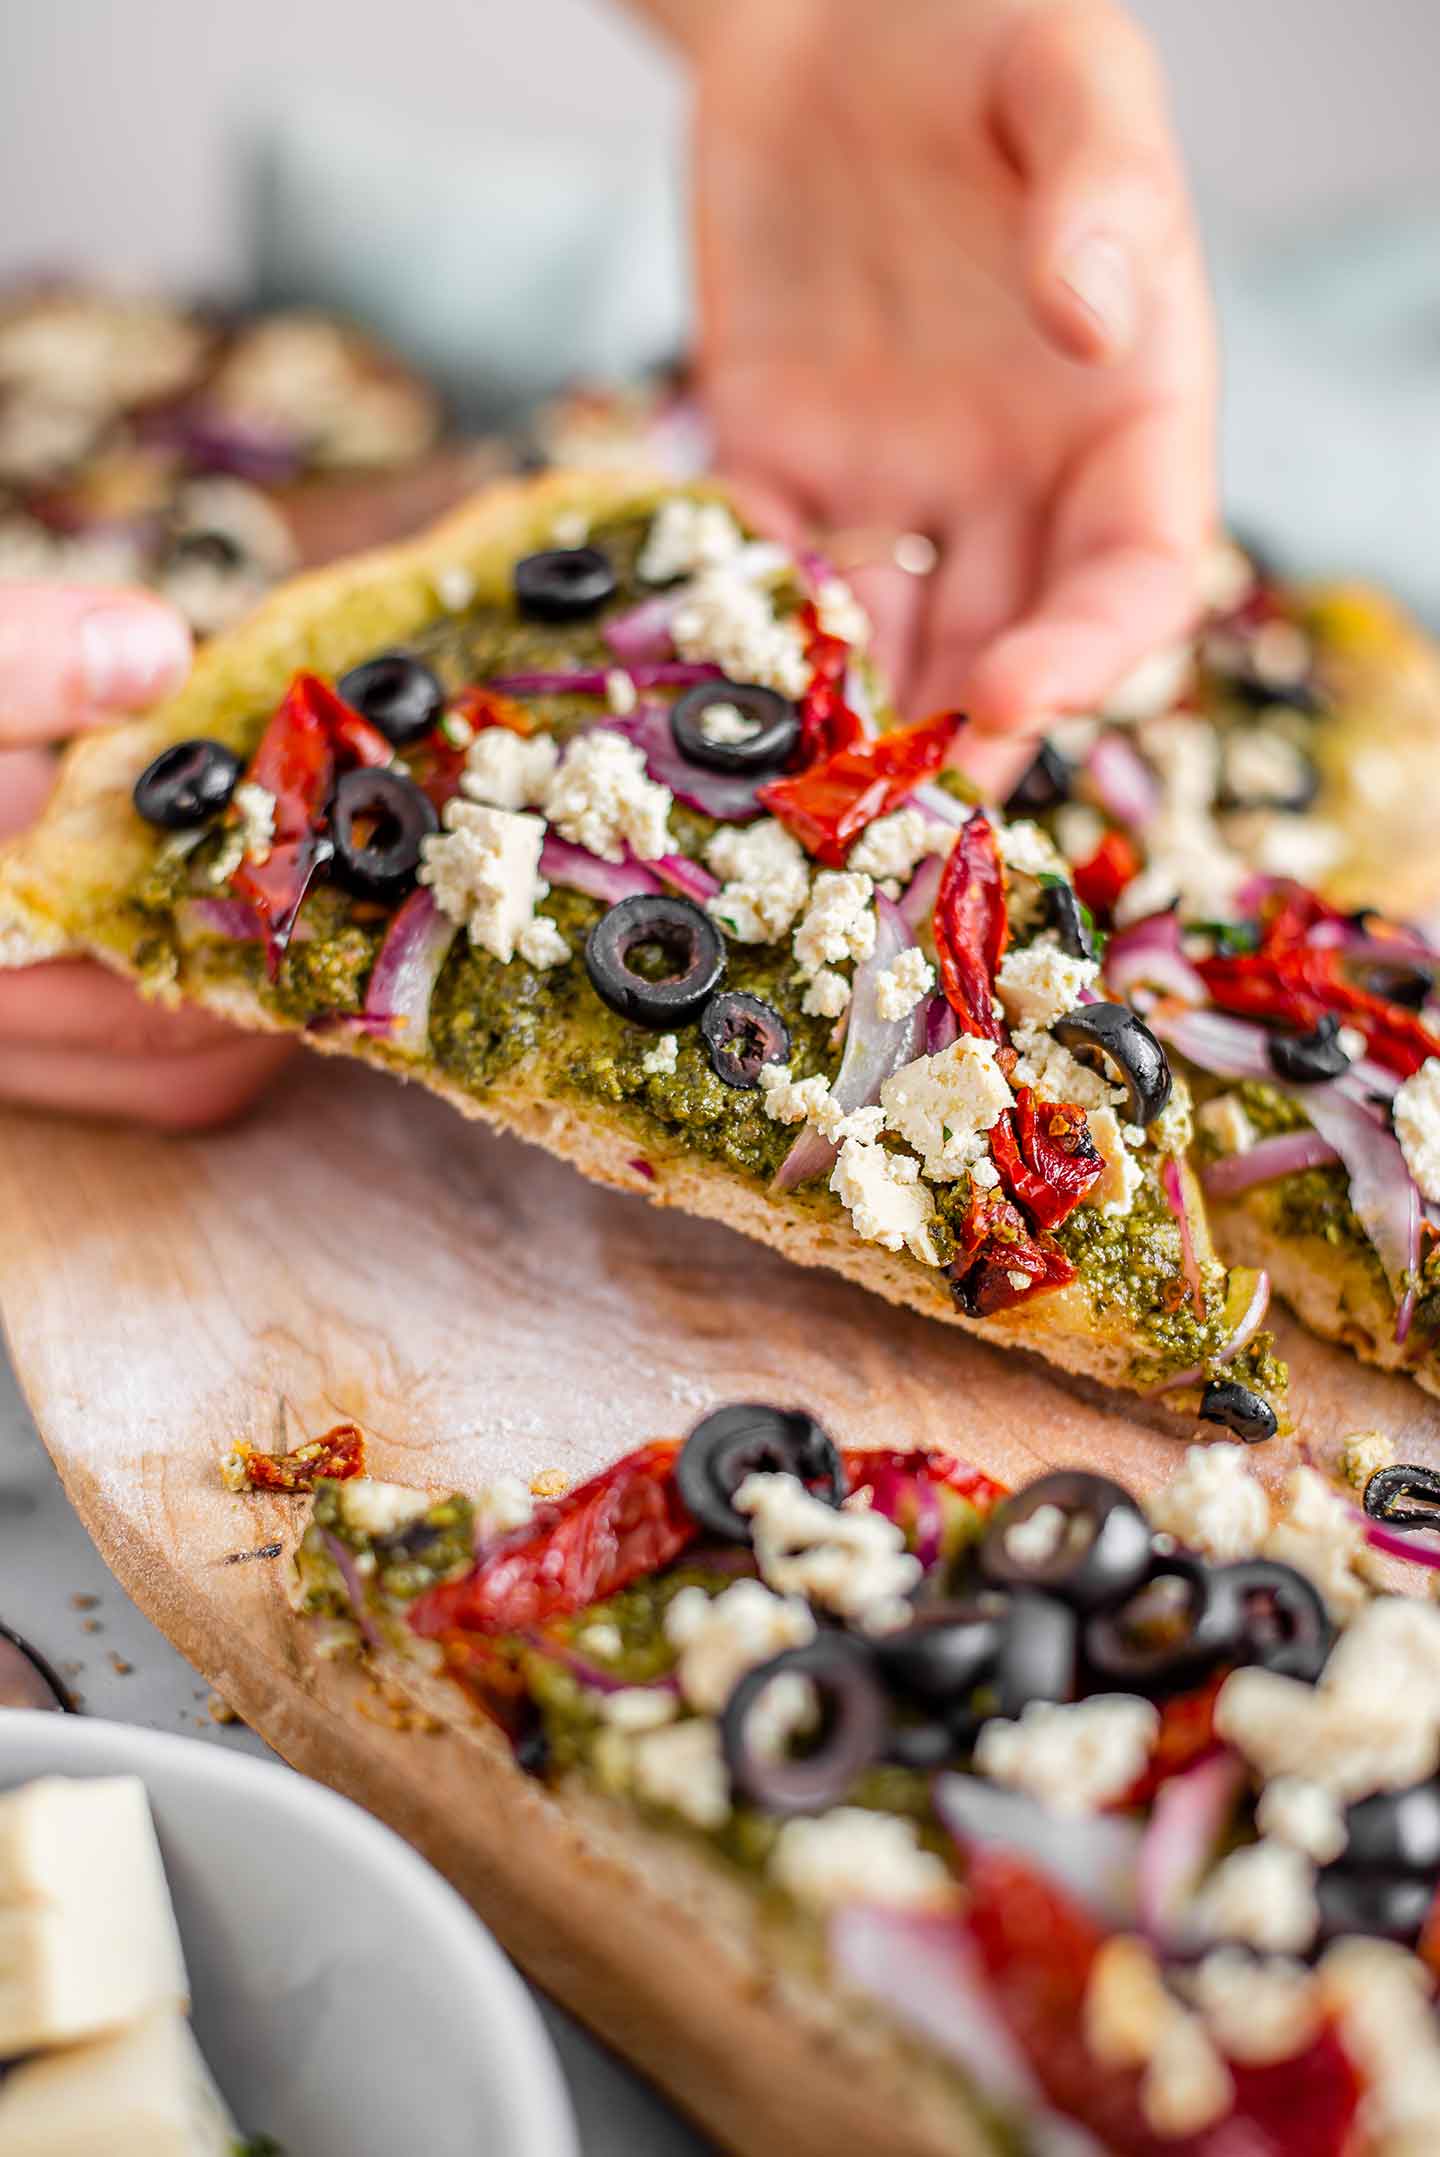 Side view of hand lifting a slice of pesto pizza with feta from a wooden tray.